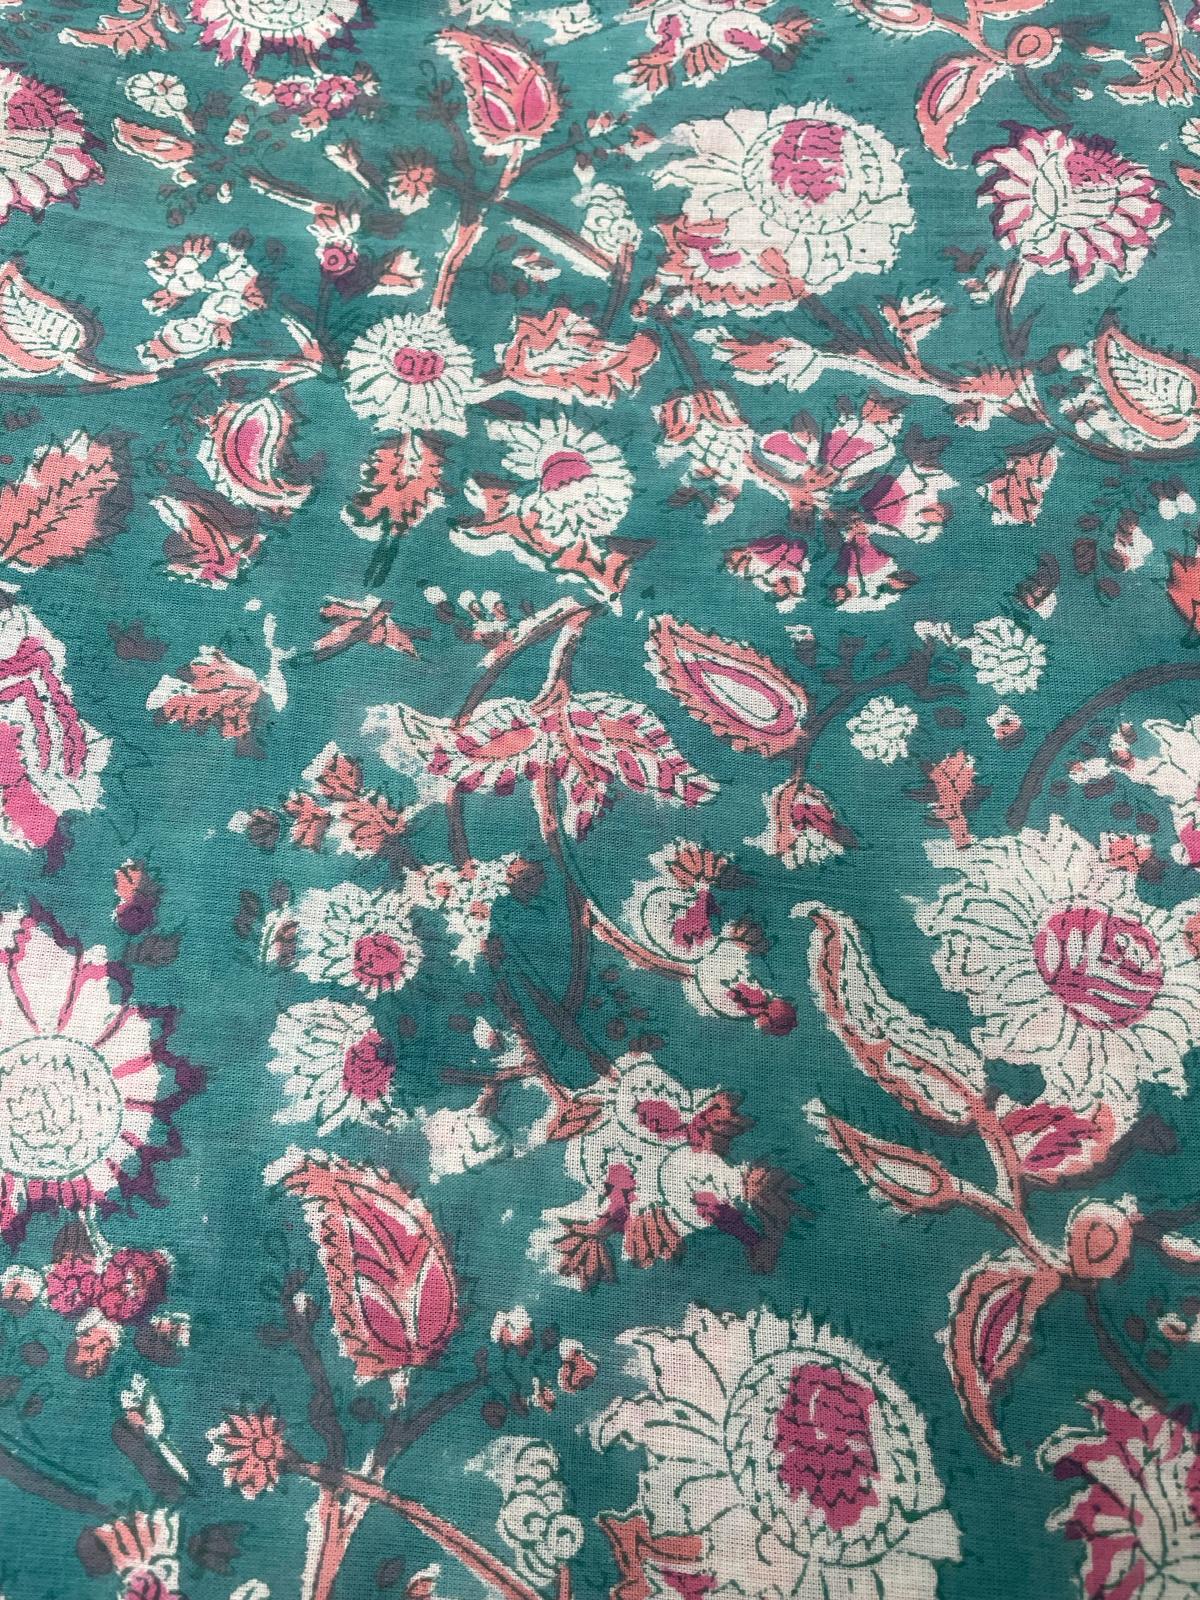 Block Print Fabric - Red Flowers On Teal( Design 468)